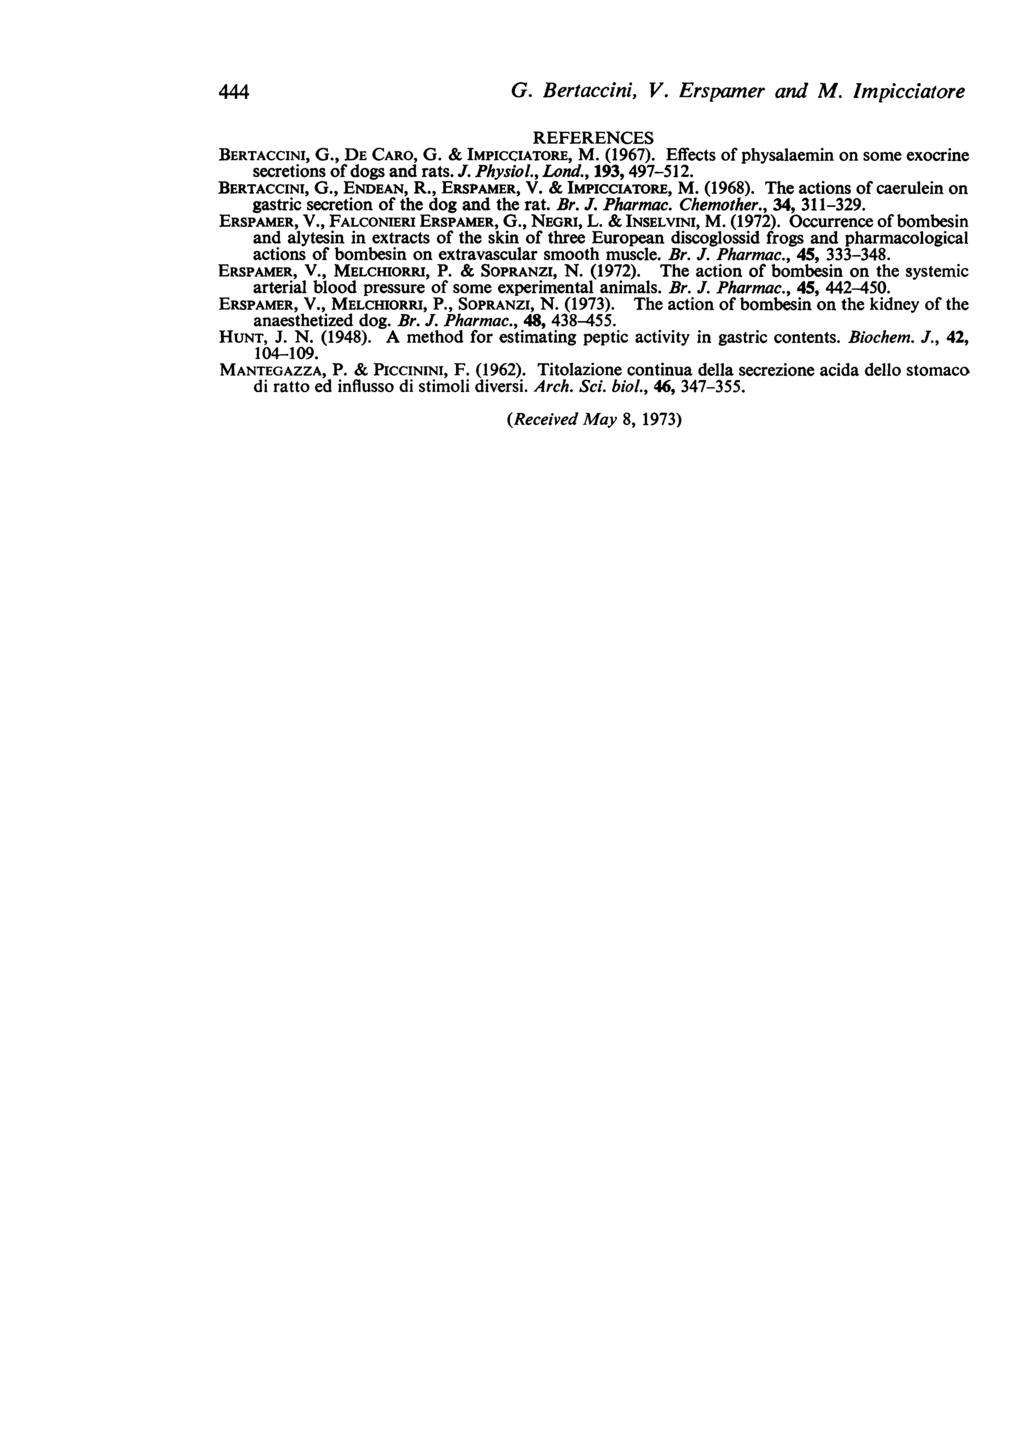 444 G. Bertaccini, V. Erspaner and M. Impicciatore REFERENCES BERTACCINI, G., DE CARO, G. & IMPICCIATORE, M. (1967). Effects of physalaemin on some exocrine secretions of dogs and rats. J. Physiol.